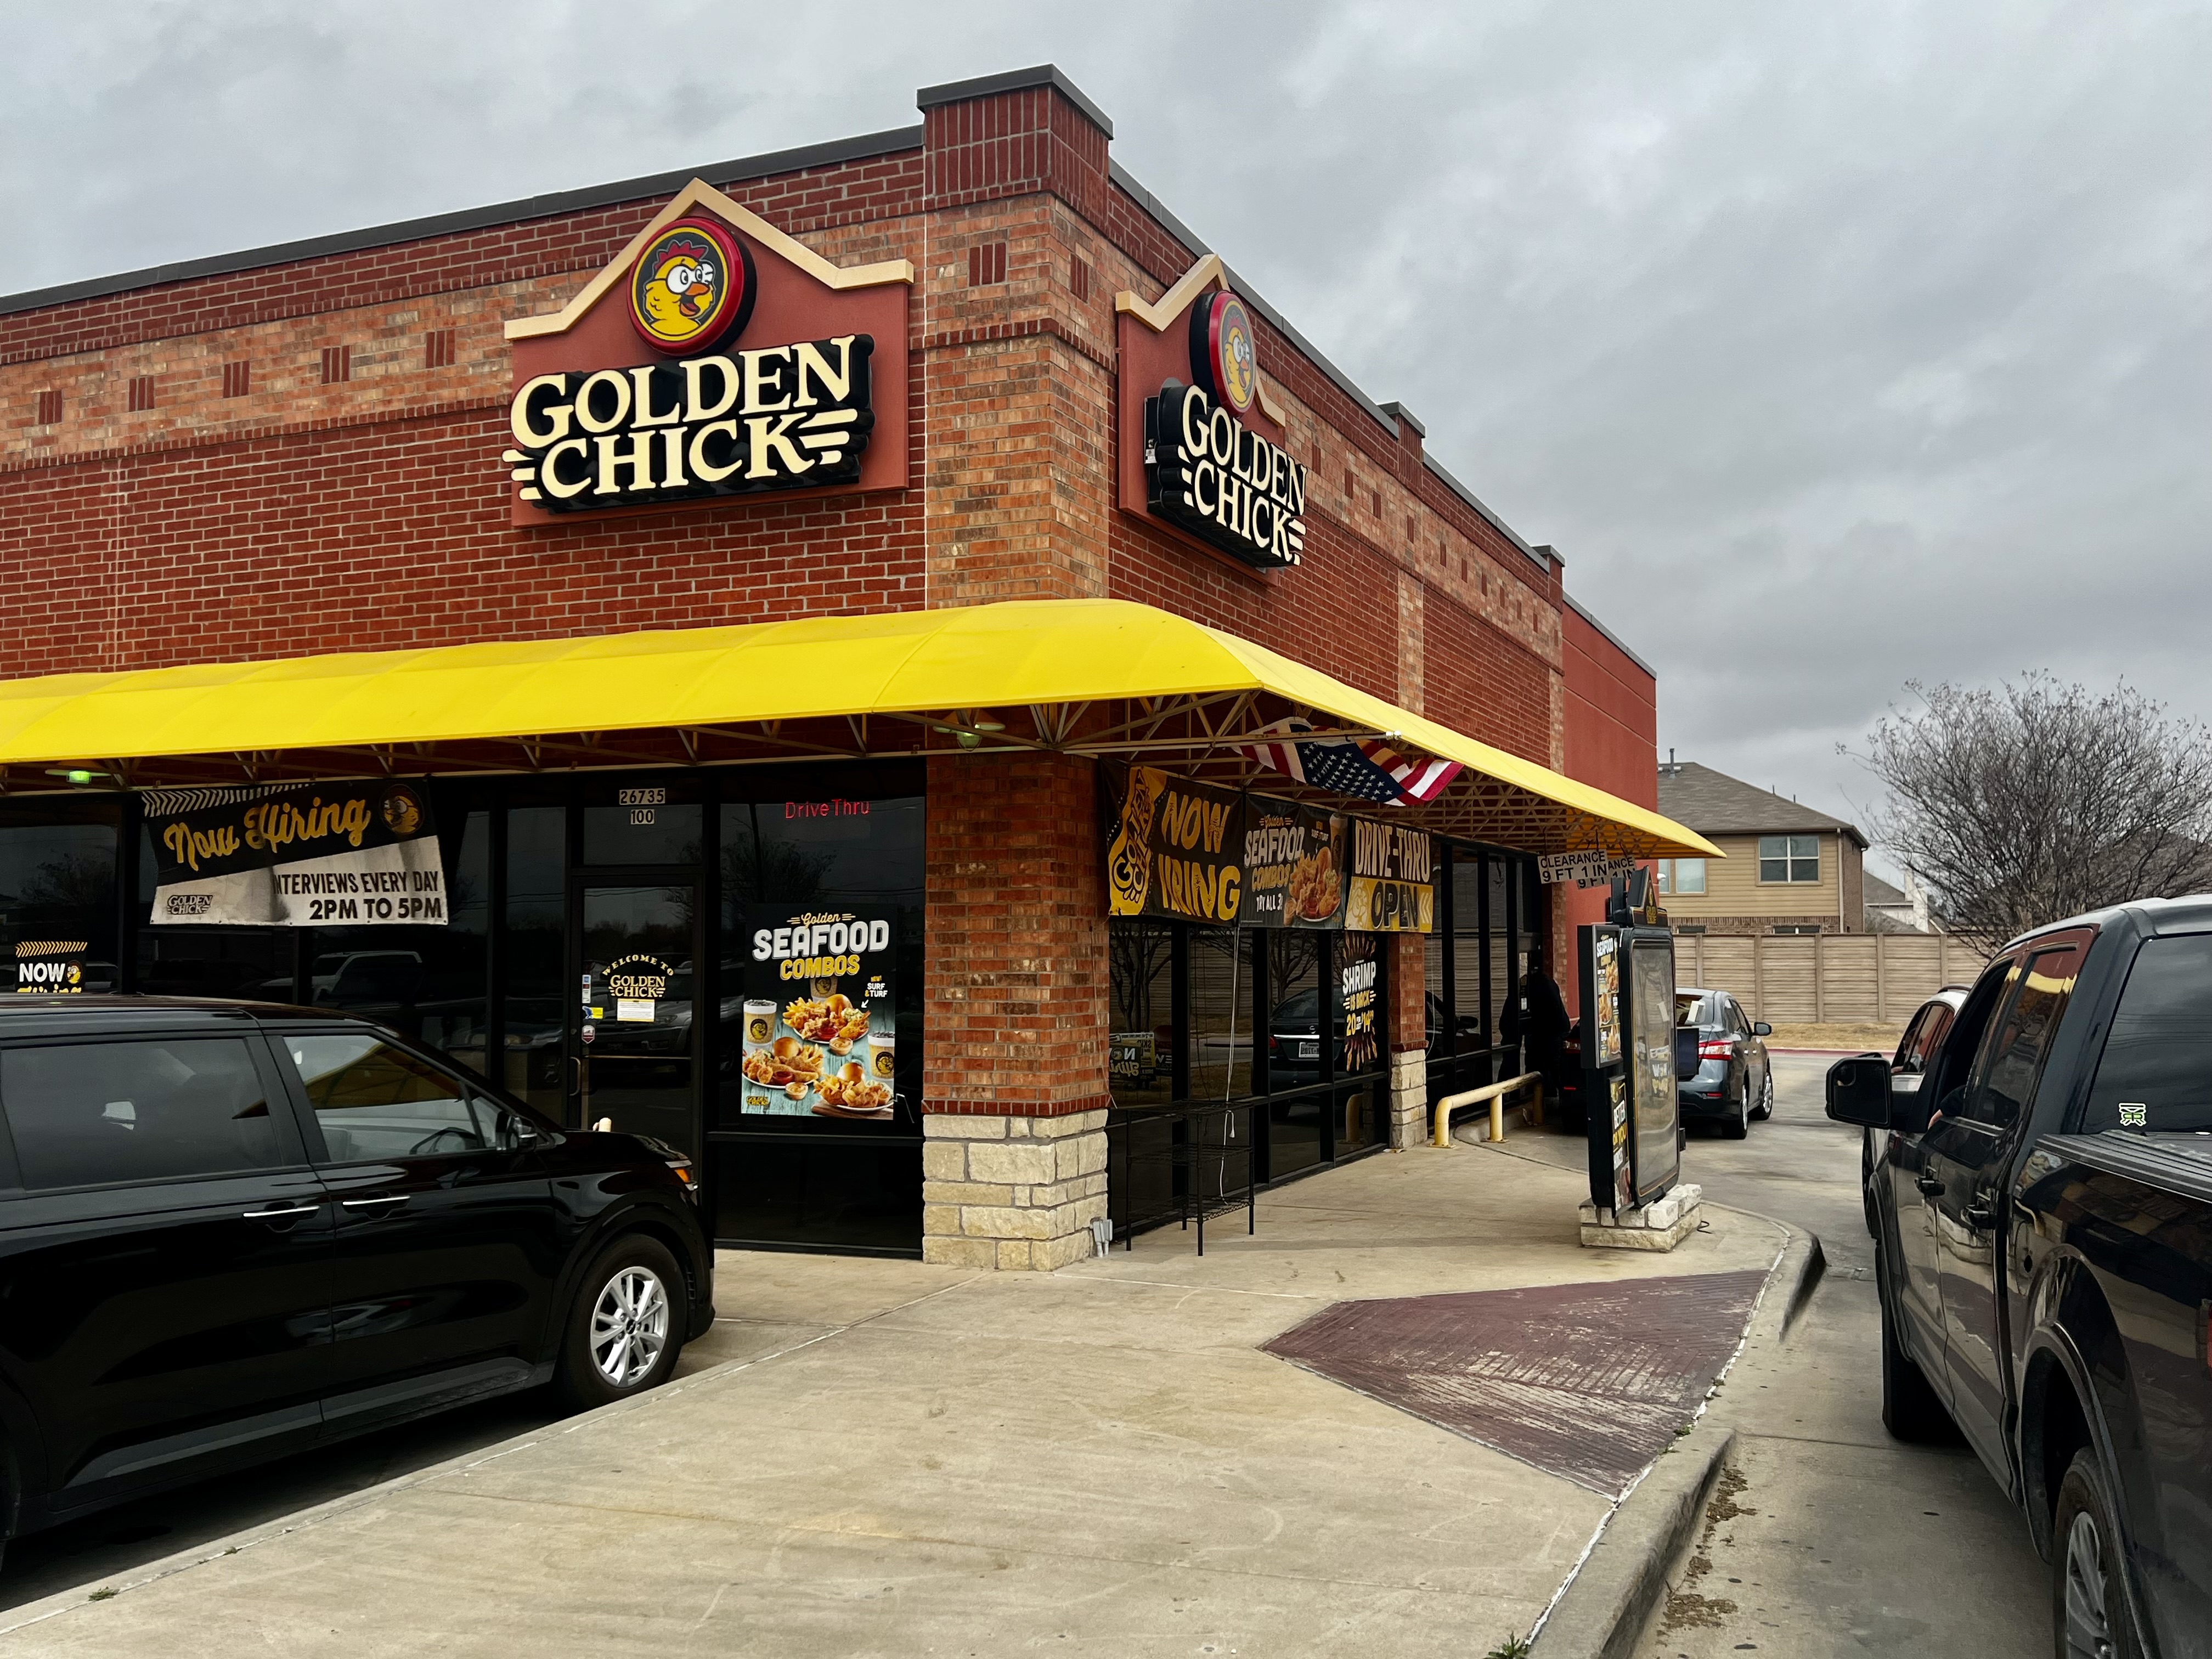 Golden Chick storefront.  Your local Golden Chick fast food restaurant in Little Elm, Texas